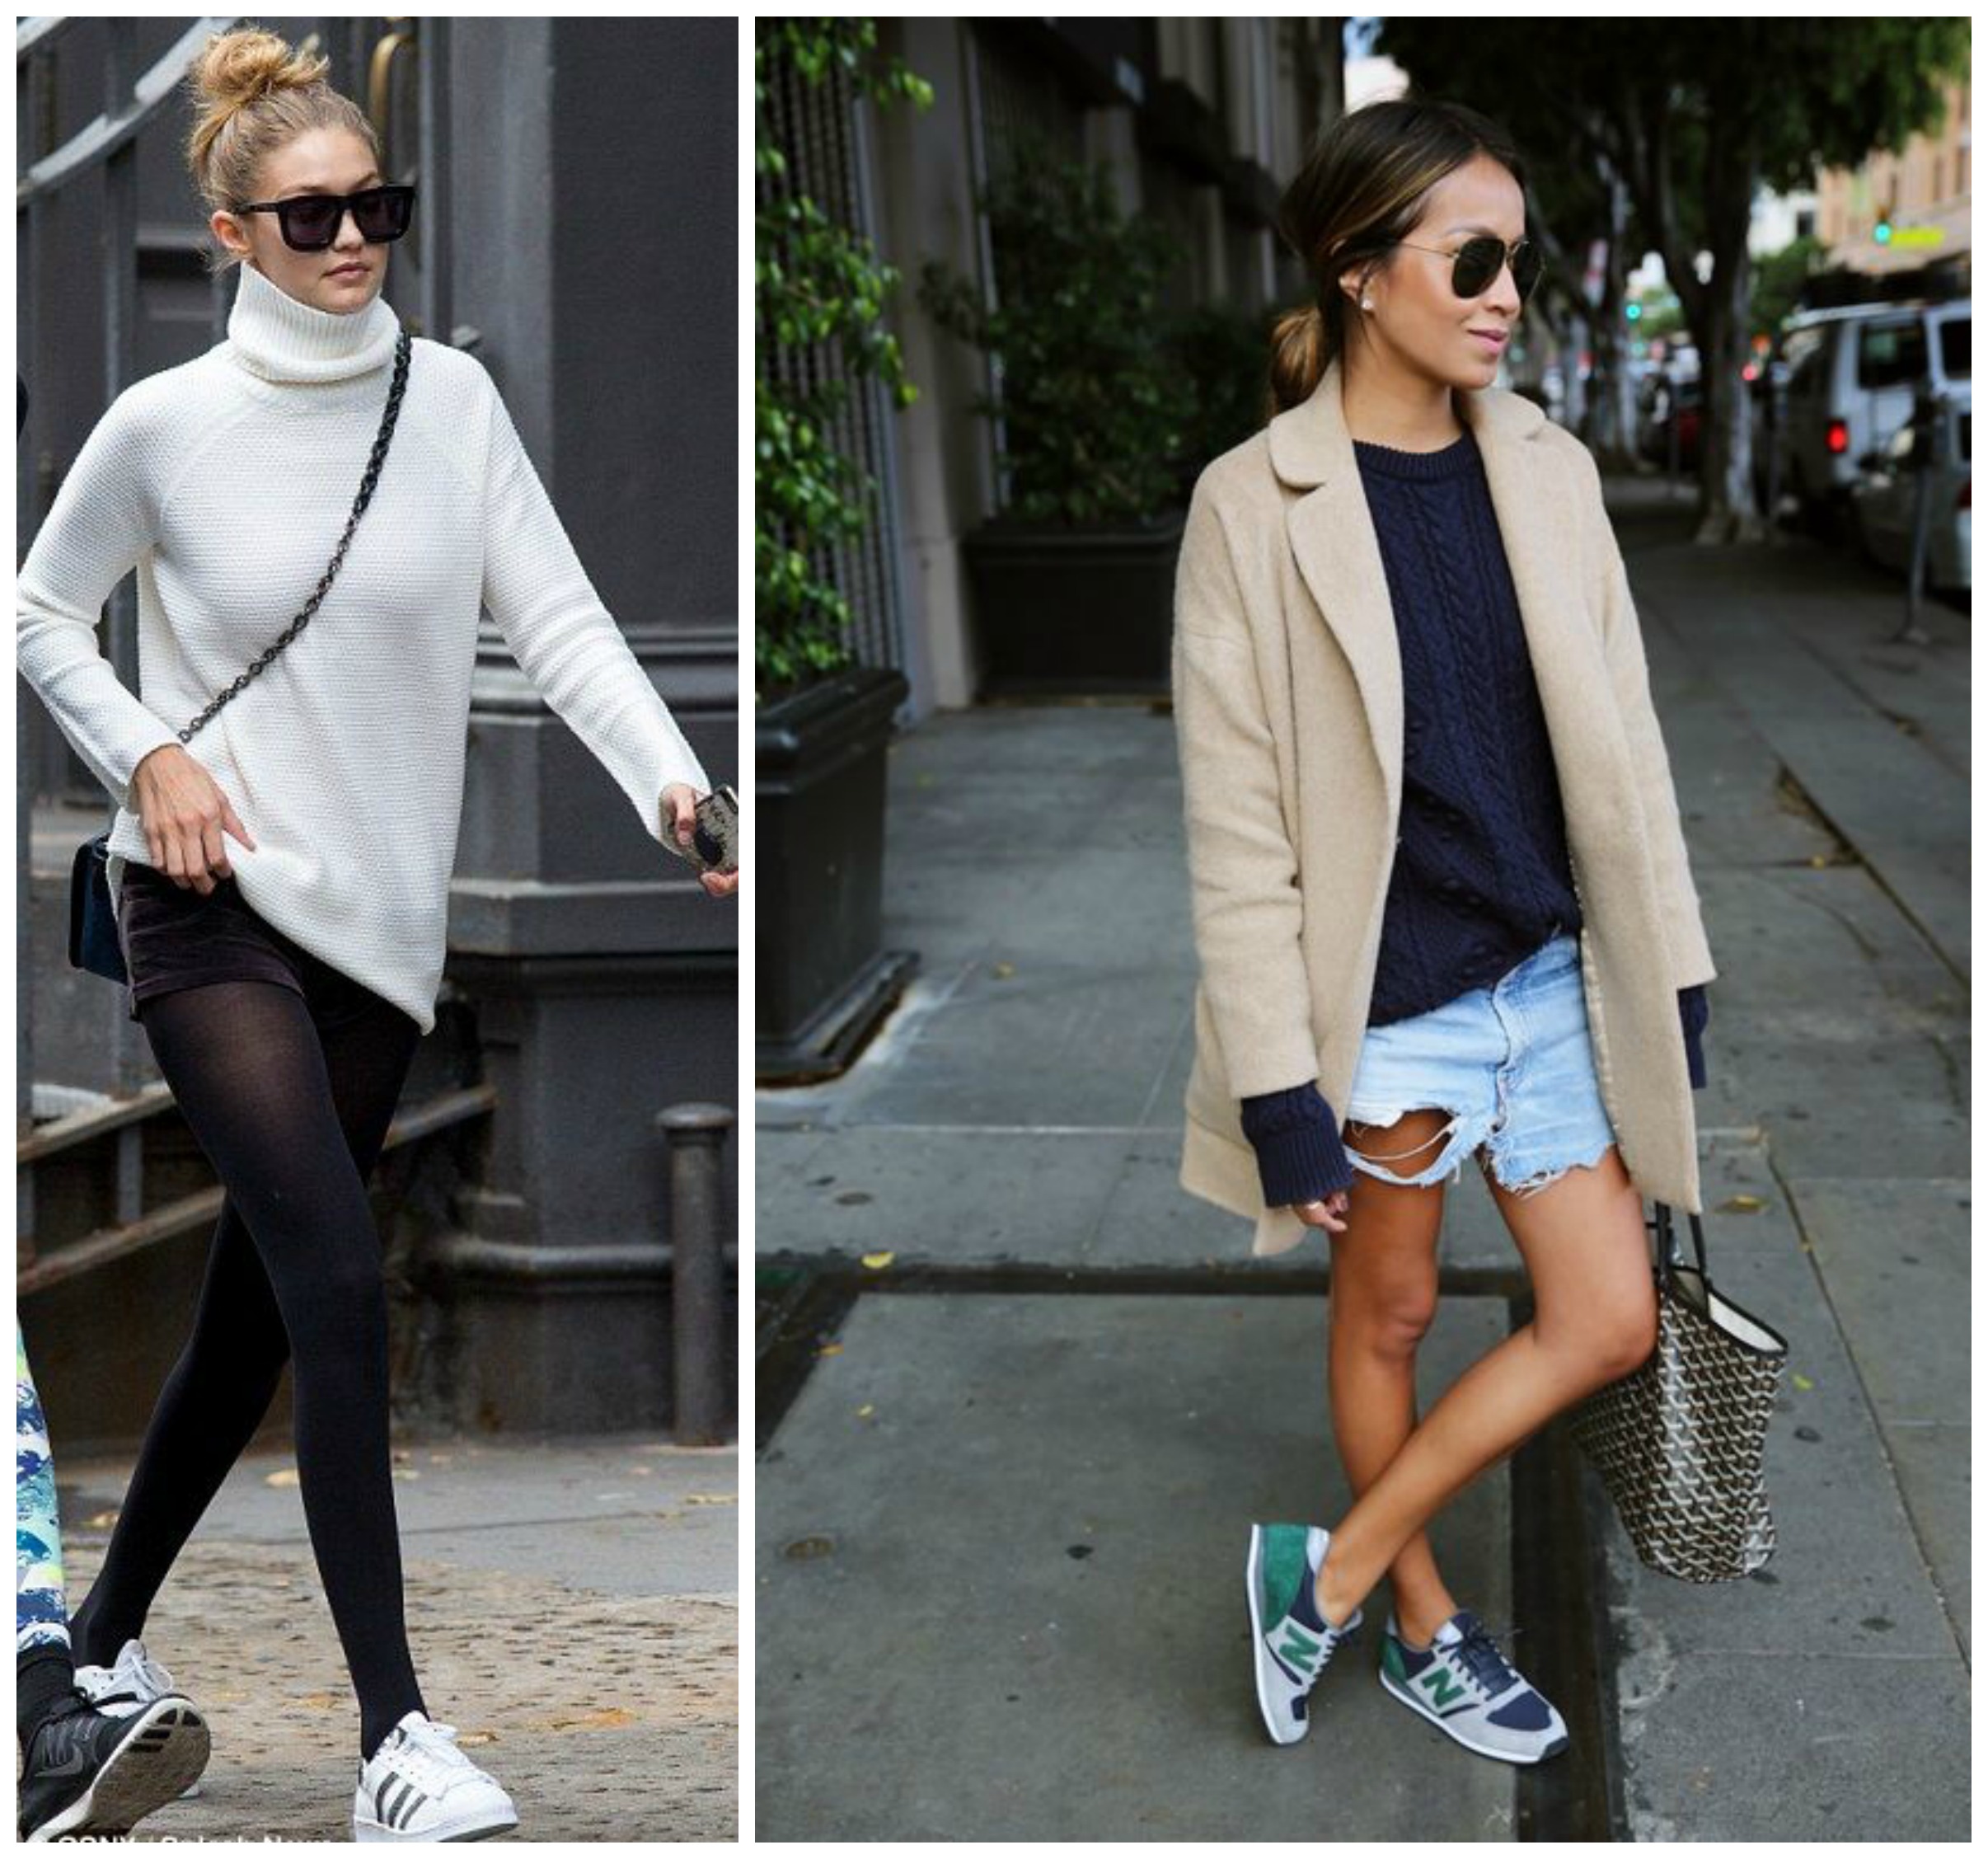 What Shoes to Wear With Shorts? 20 Best Shoes for Girls